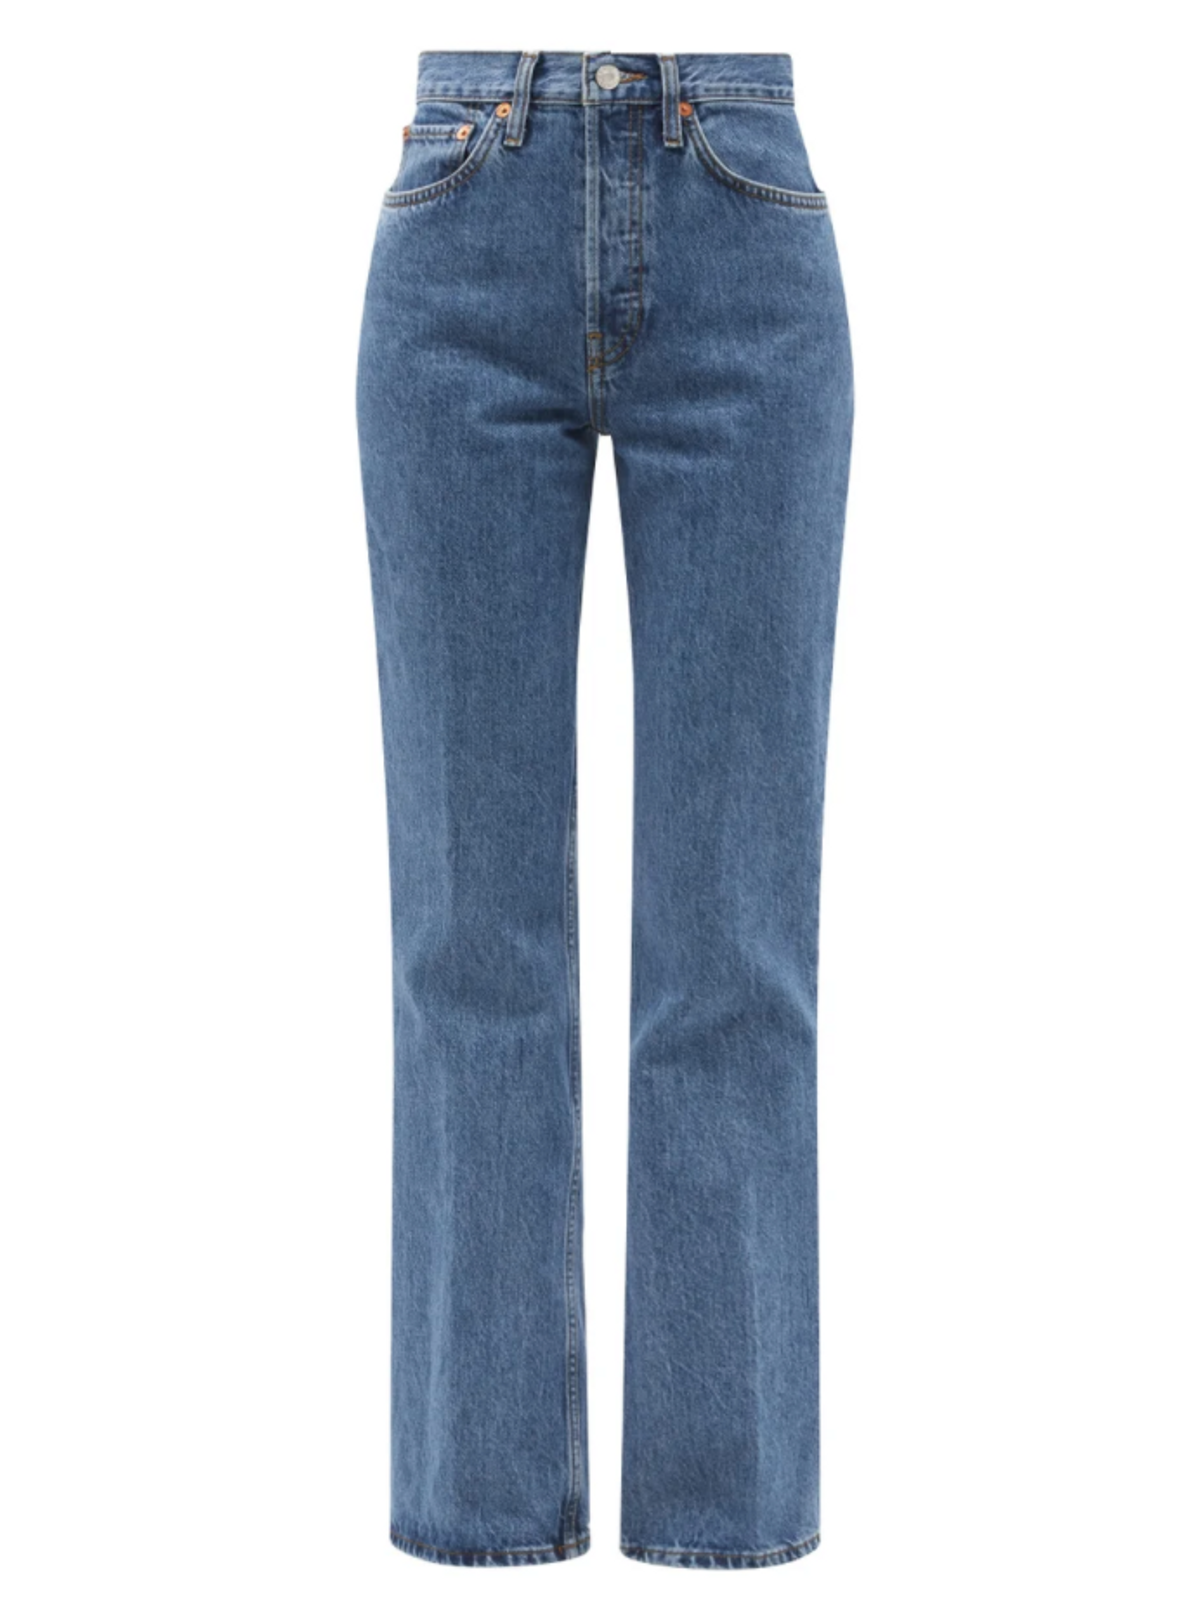 ‘70s Bootcut High Rise Jeans